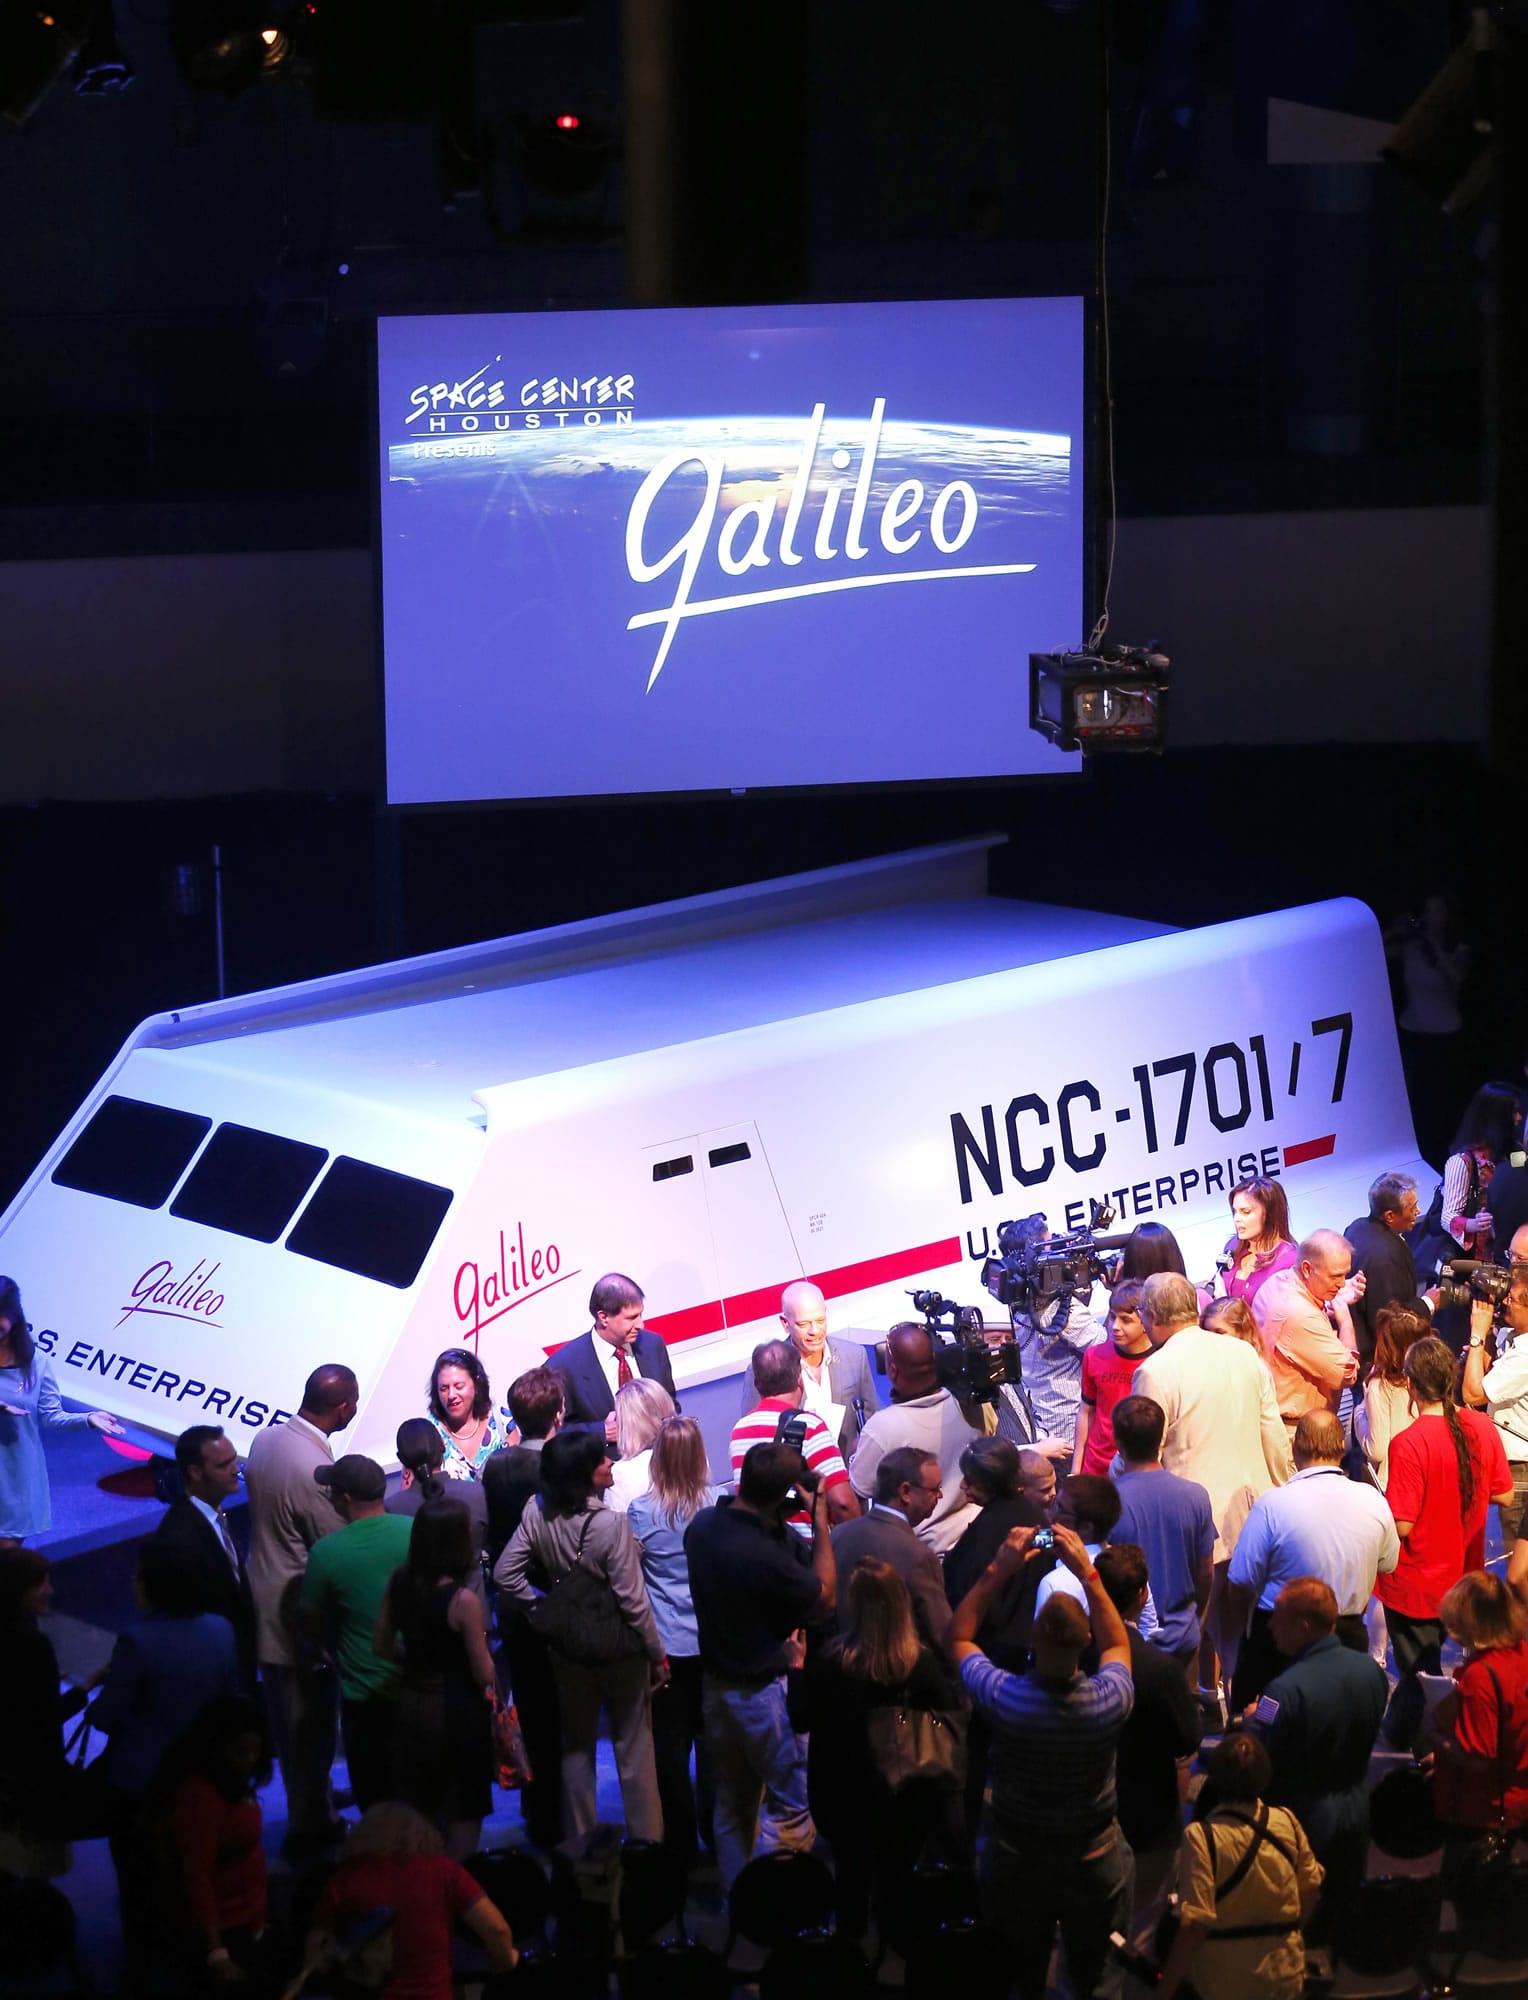 People gather around the restored shuttlecraft Galileo from the 1960s television show &quot;Star Trek&quot; as it is unveiled Wednesday at Space Center Houston.